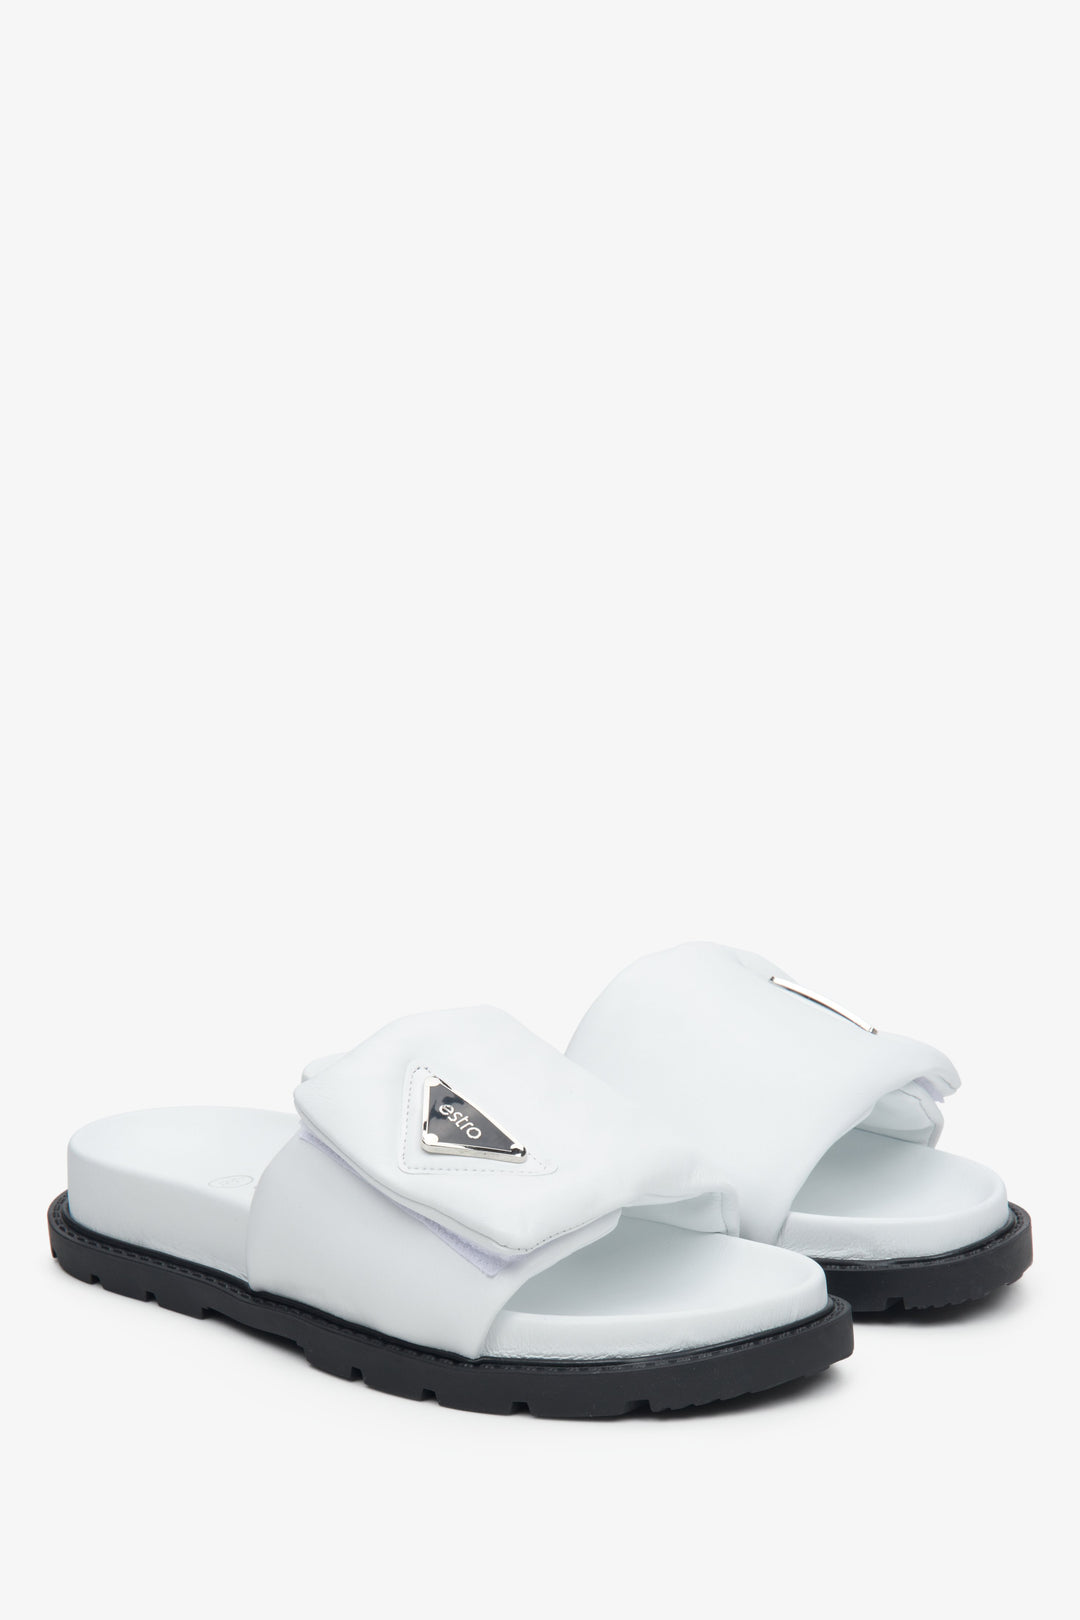 Chic, perfect for summer women's white slides on an elastic sole.